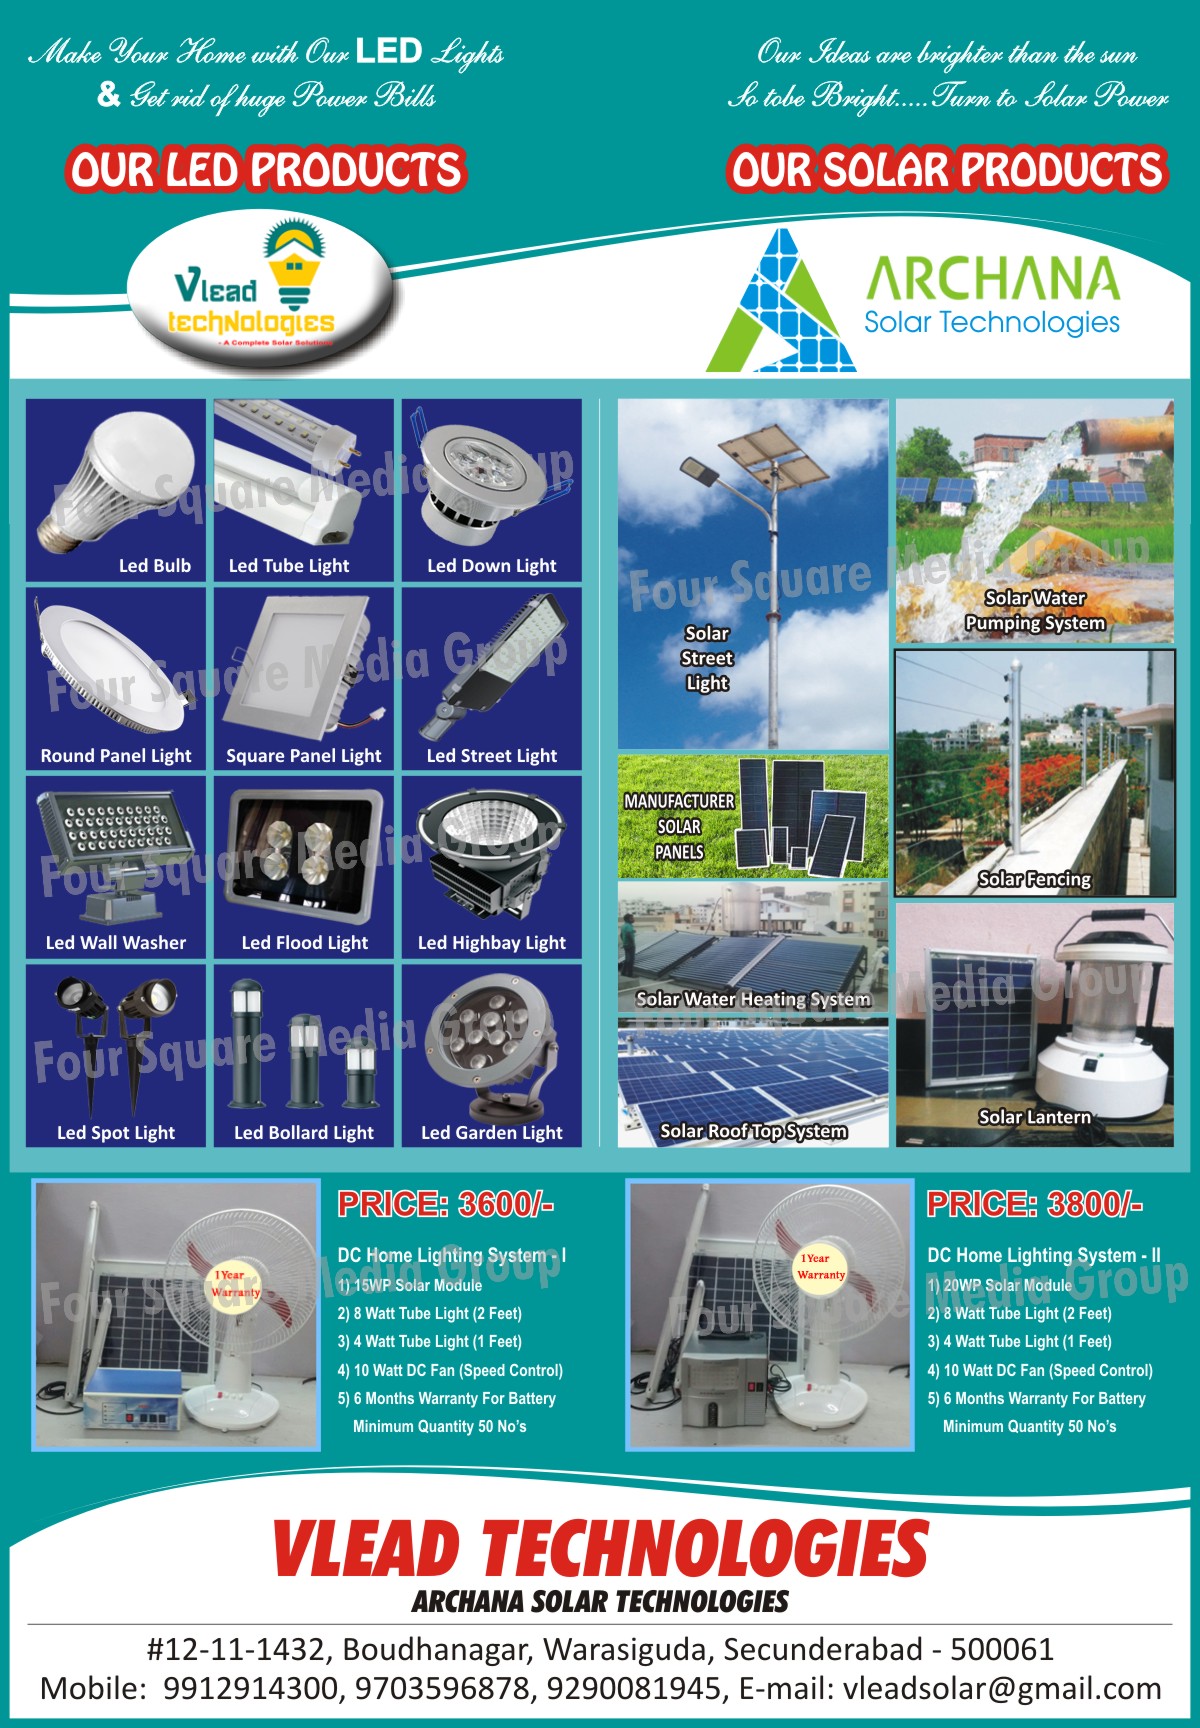 Led bulbs, Led Tube Lights, Led Down Lights, Led Round Panel Lights, Led Square Panel Lights, Led Street Lights, Led Wall Washers, Led Flood Lights, Led High bay Lights, Led Spot Lights, Led bollard Lights, Led Garden Lights, Solar Street Lights, Solar Water Pumping Systems, Solar Fencing, Solar Water Heating Systems, Solar Lanterns, Solar Roof Top Systems, Solar Panels, DC Home Lighting Systems